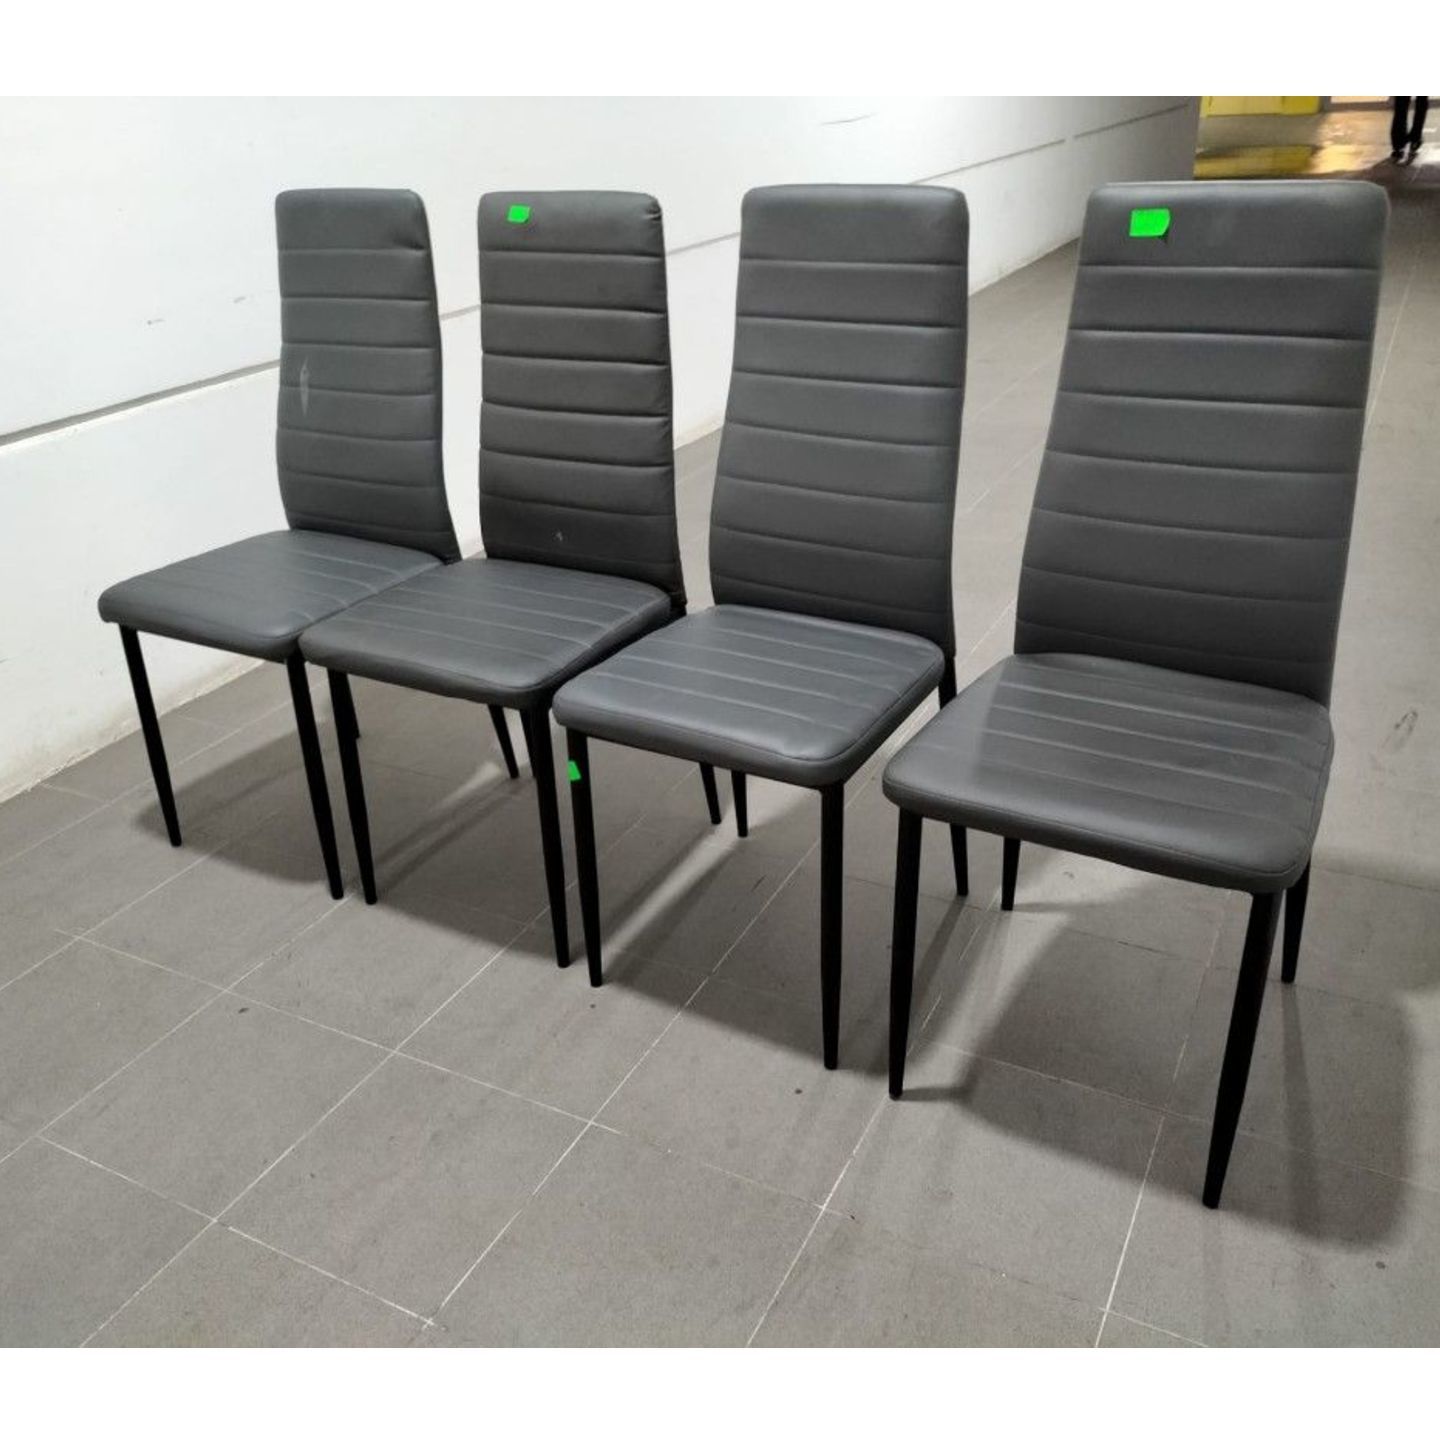 4 x HARLE Dining Chairs in GREY